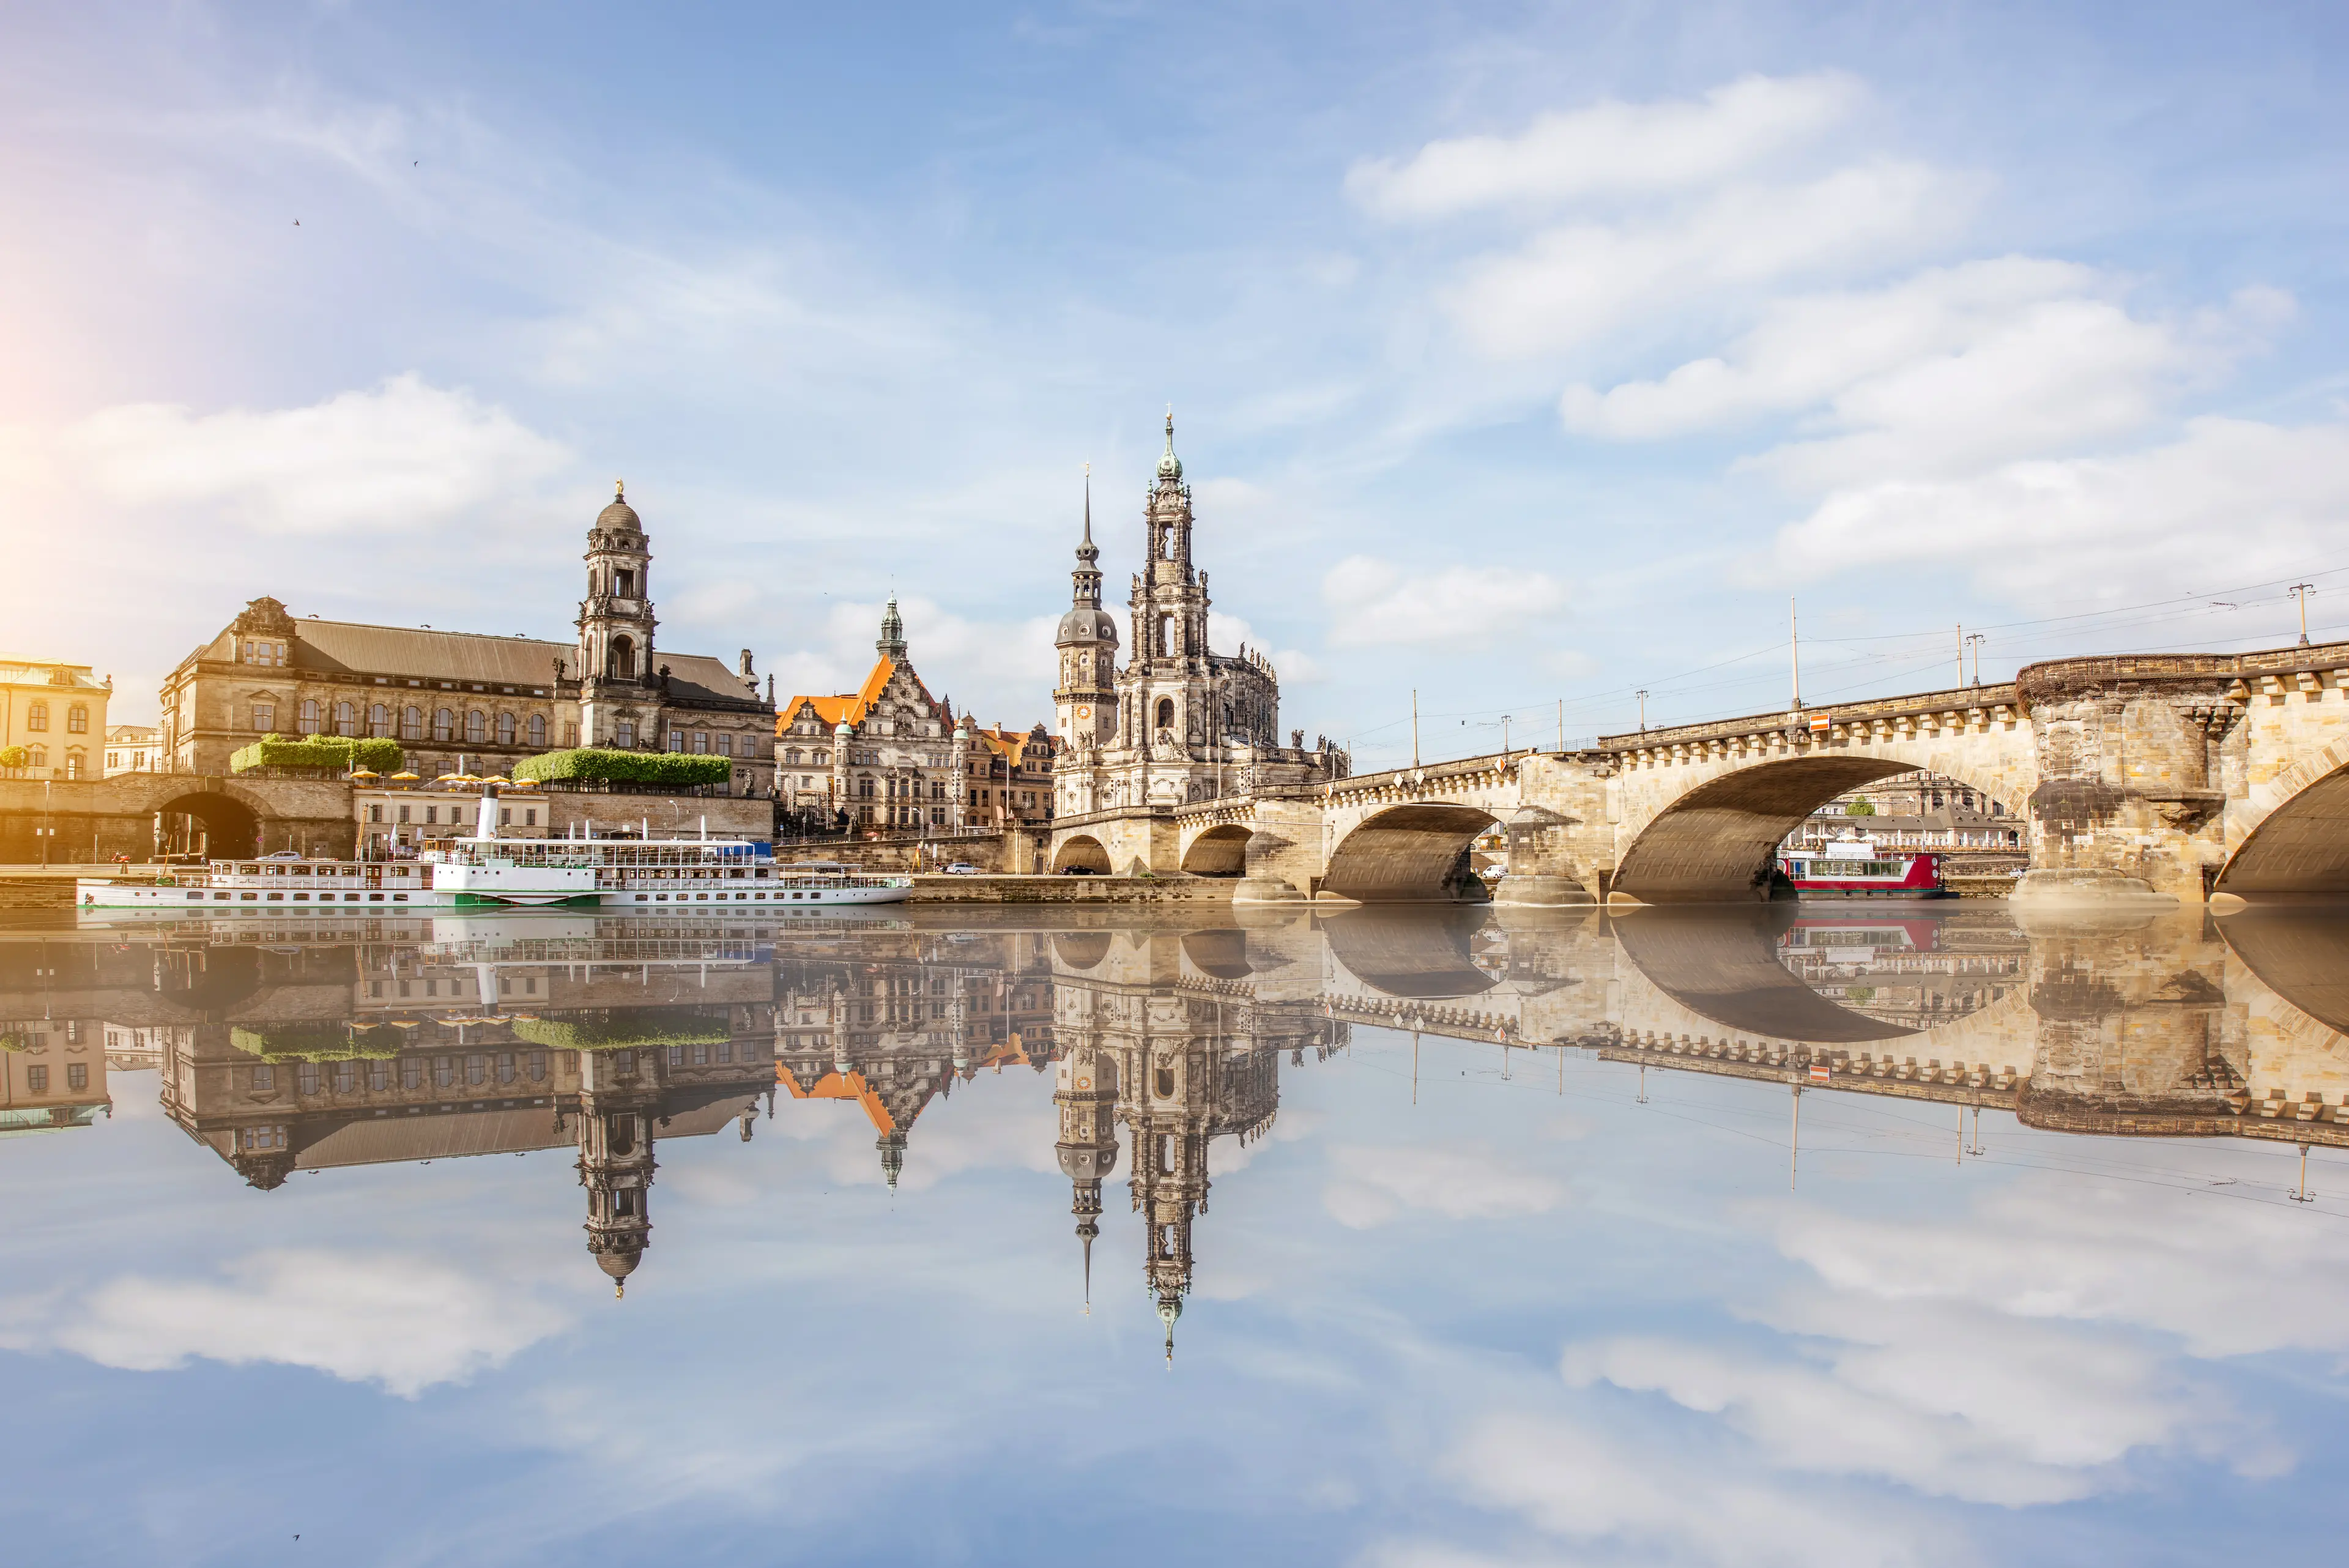 3-Day Family Adventure: Sightseeing and Shopping in Dresden, Germany